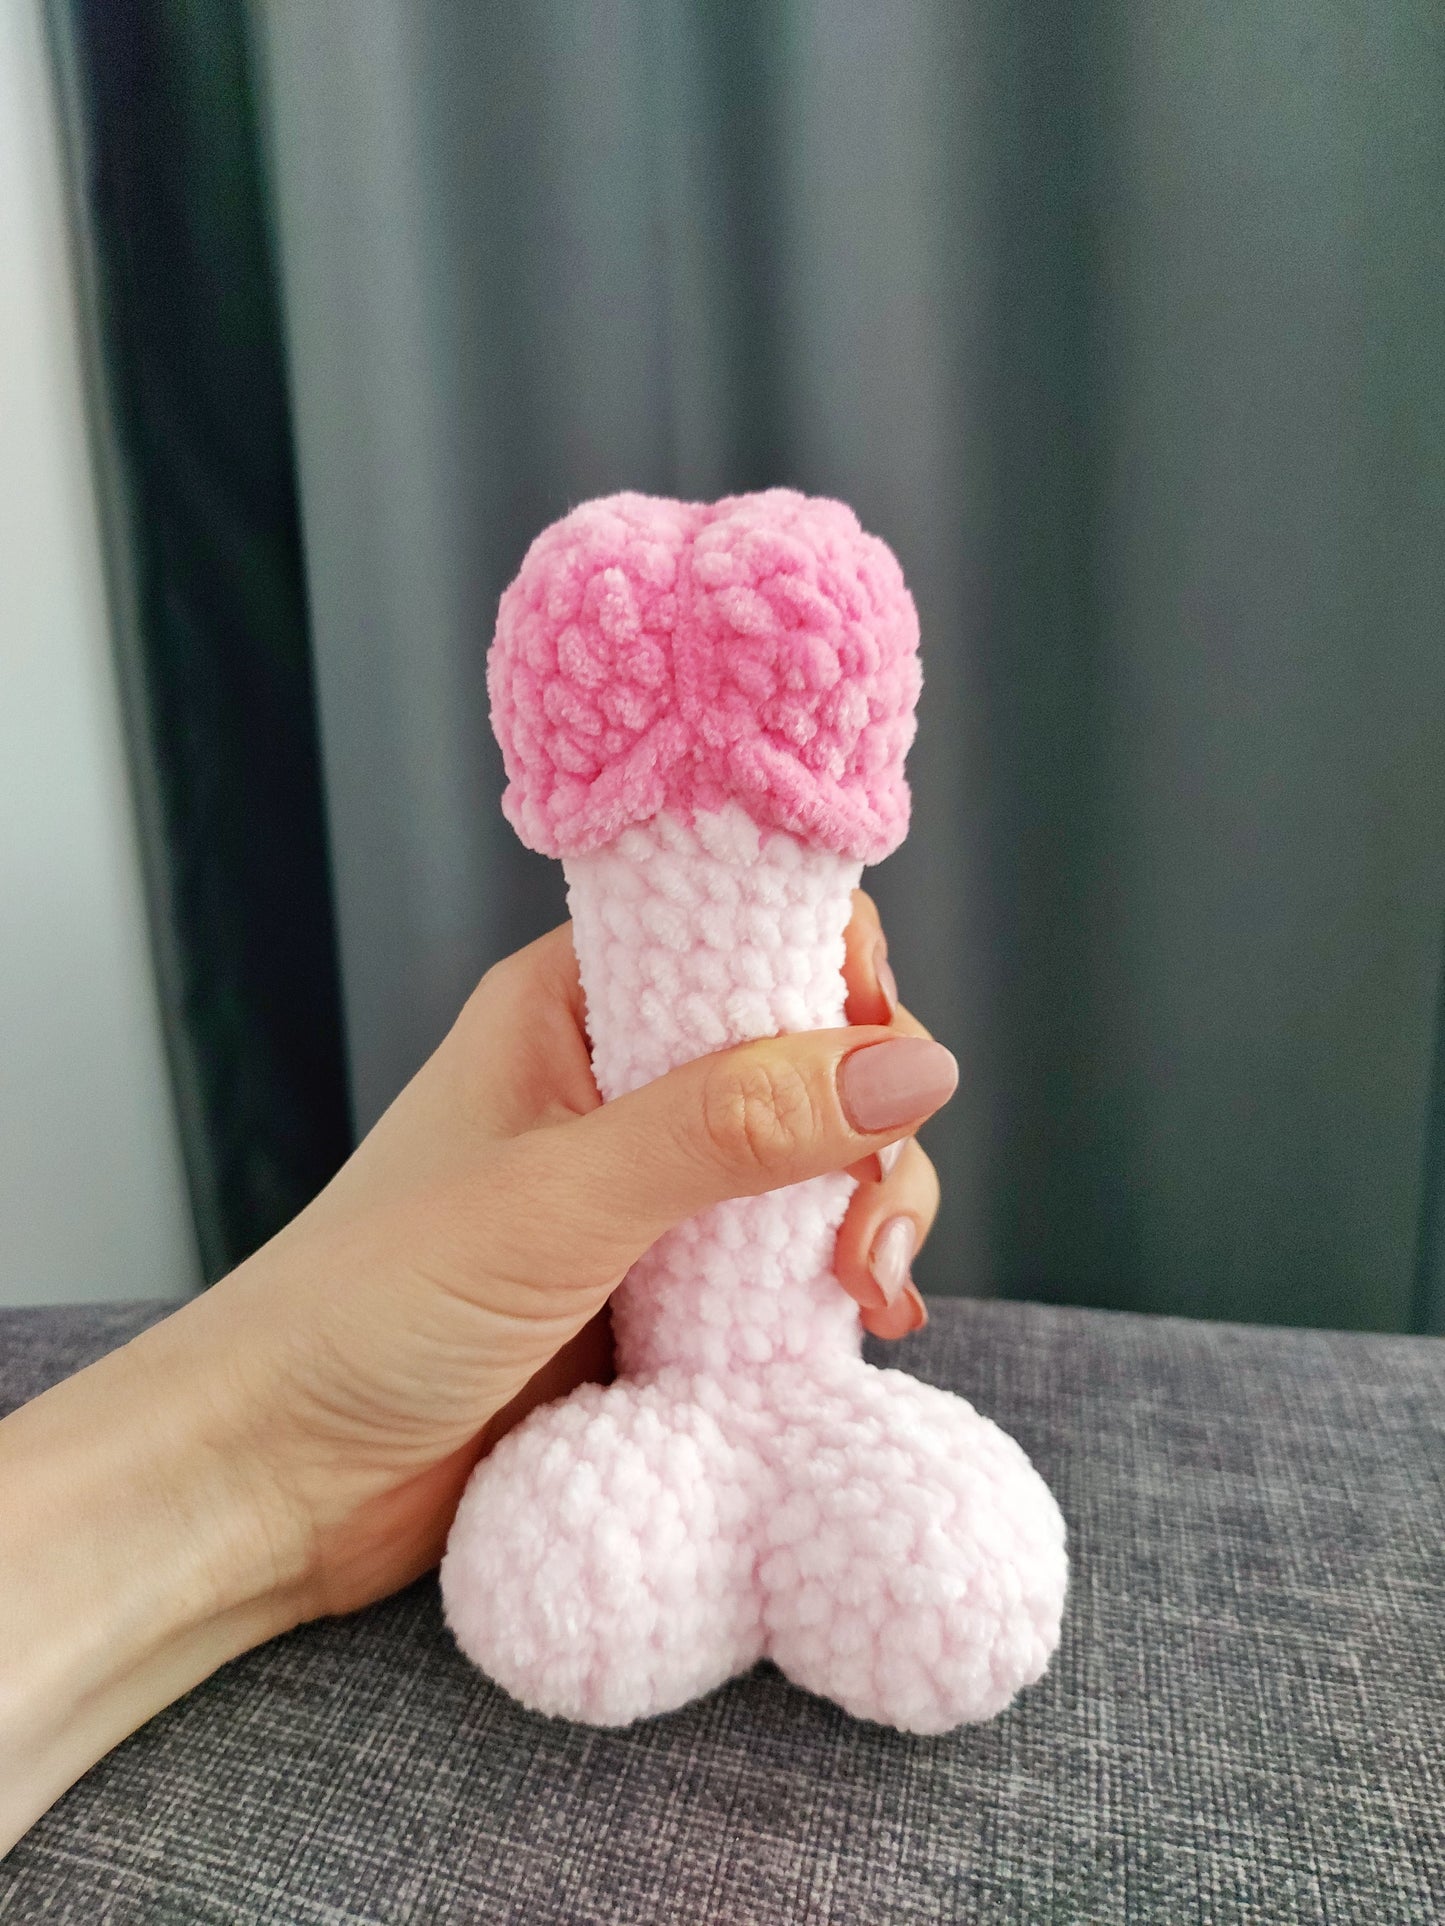 Crochet plushie penis and vulva pattern, crochet vagina pattern, Amigurumi pattern pdf, penis Pdf photo tutorial, Funny mature gift for her